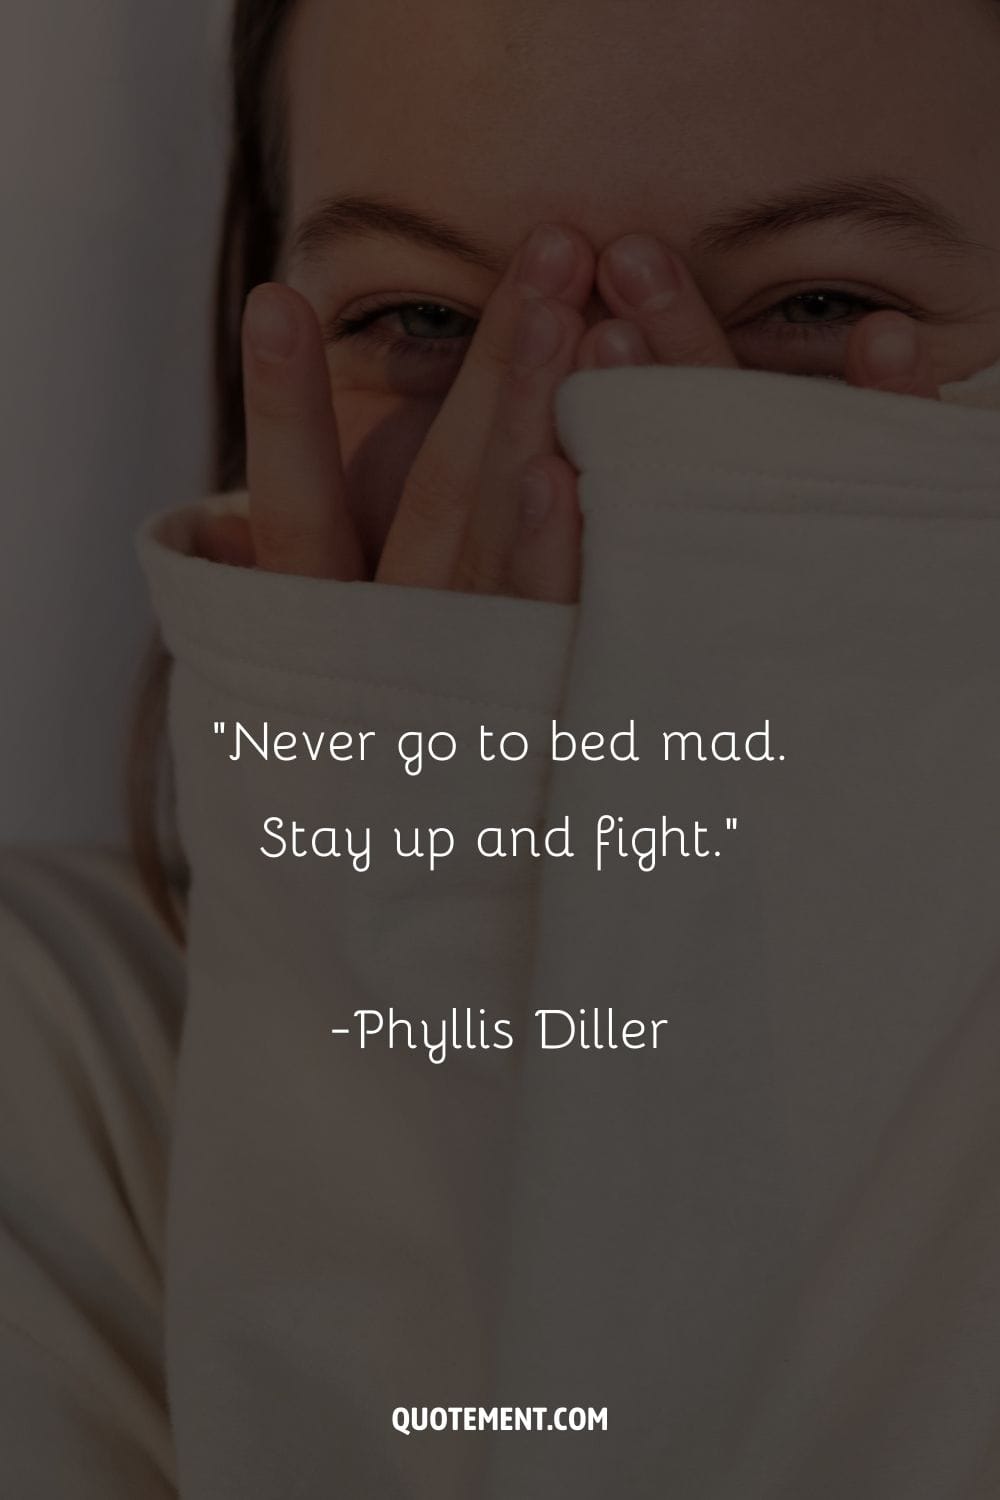 “Never go to bed mad. Stay up and fight.” ― Phyllis Diller